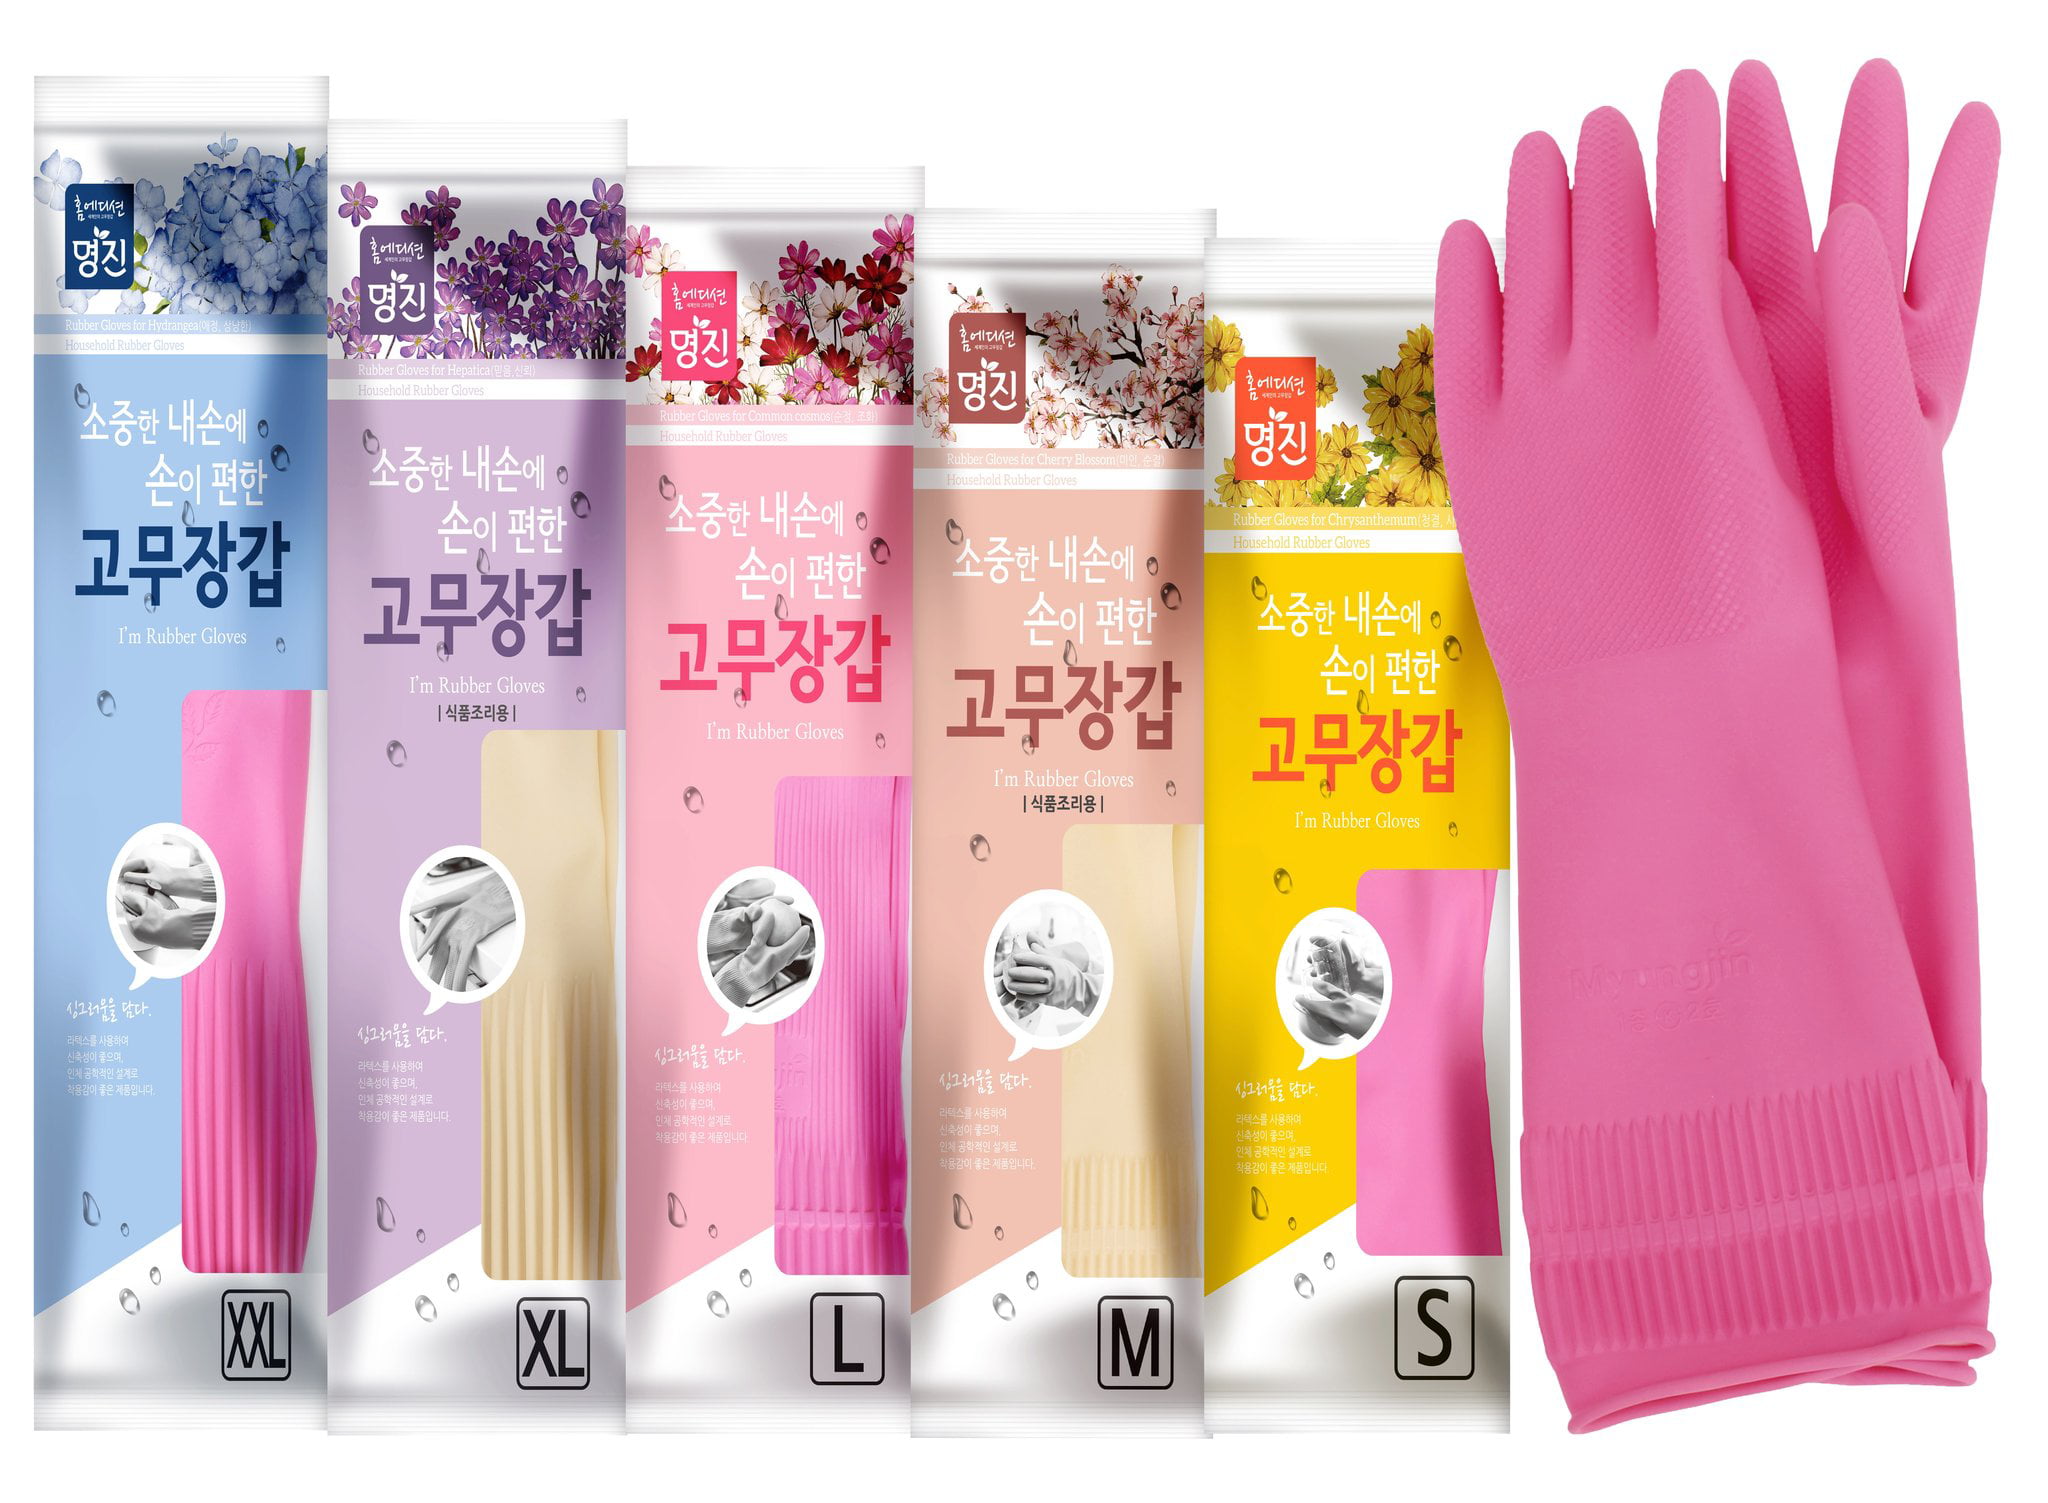 42cm Washing Gloves PVC Waterproof Long Sleeve Glove Kitchen Household Cleaning